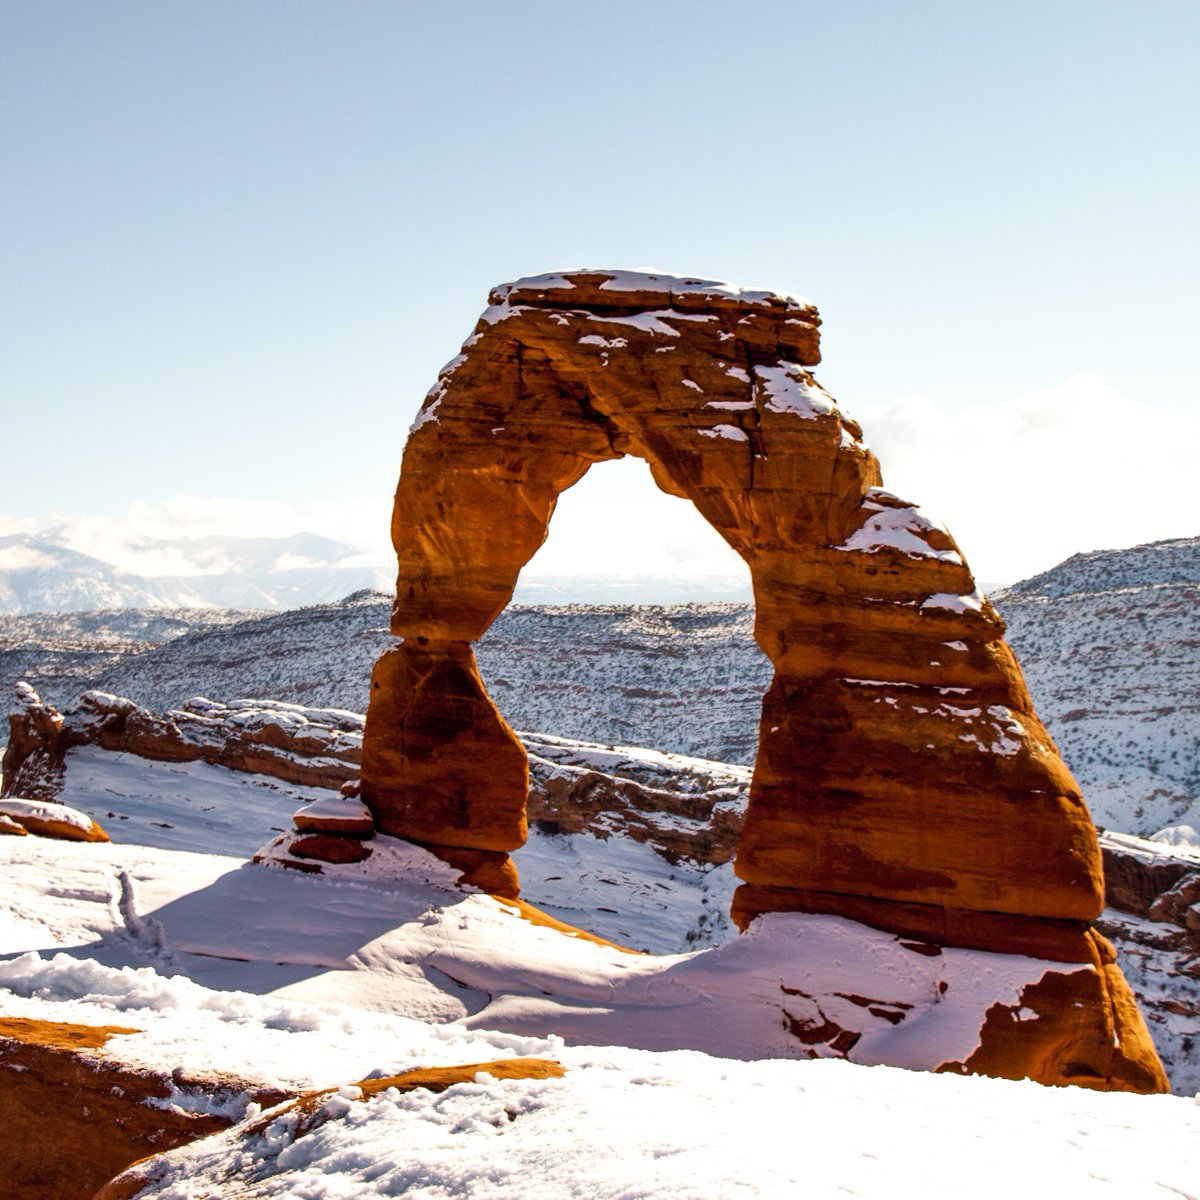 This week, Utah crossed 700' of snow for the season. That's one Delicate Arch of snow! And it keeps on coming. ❄️